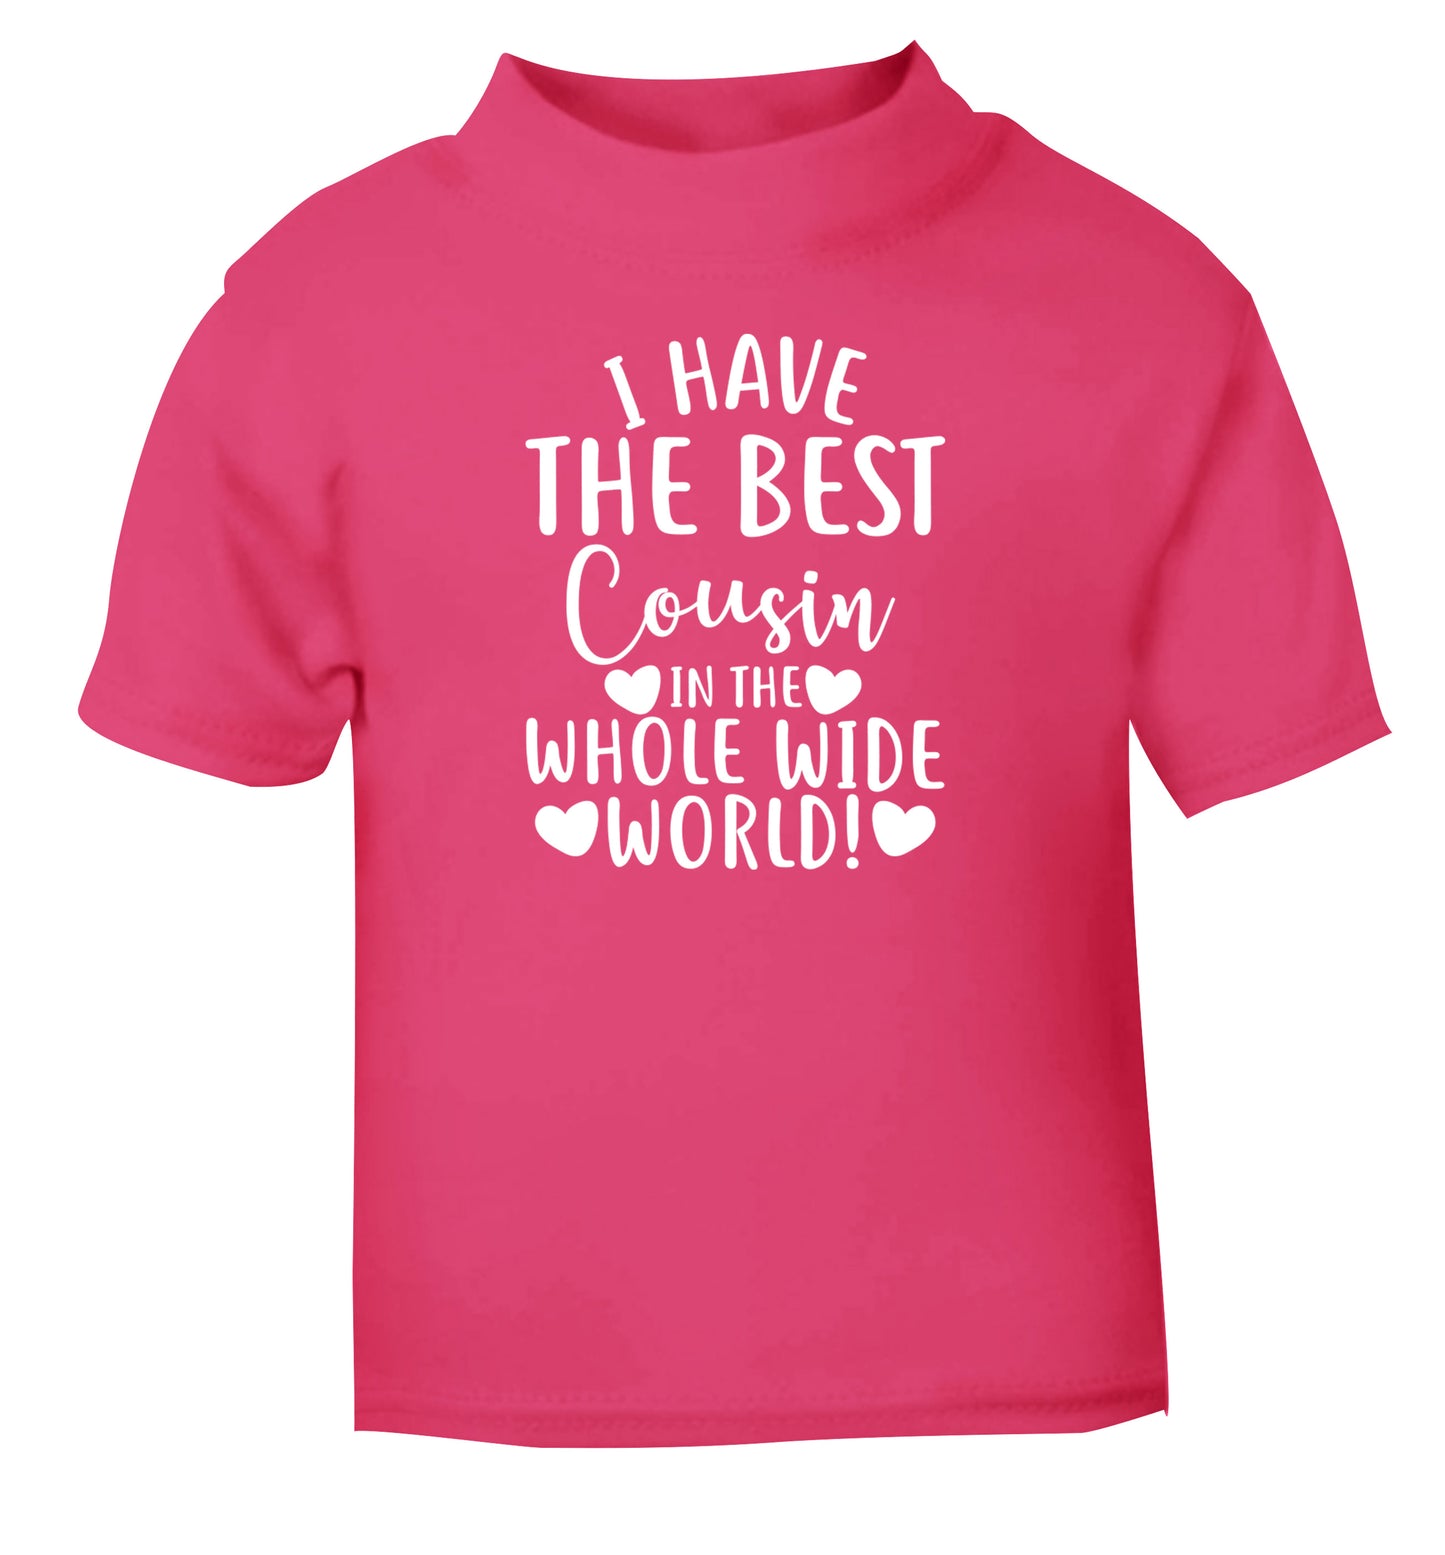 I have the best cousin in the whole wide world! pink Baby Toddler Tshirt 2 Years